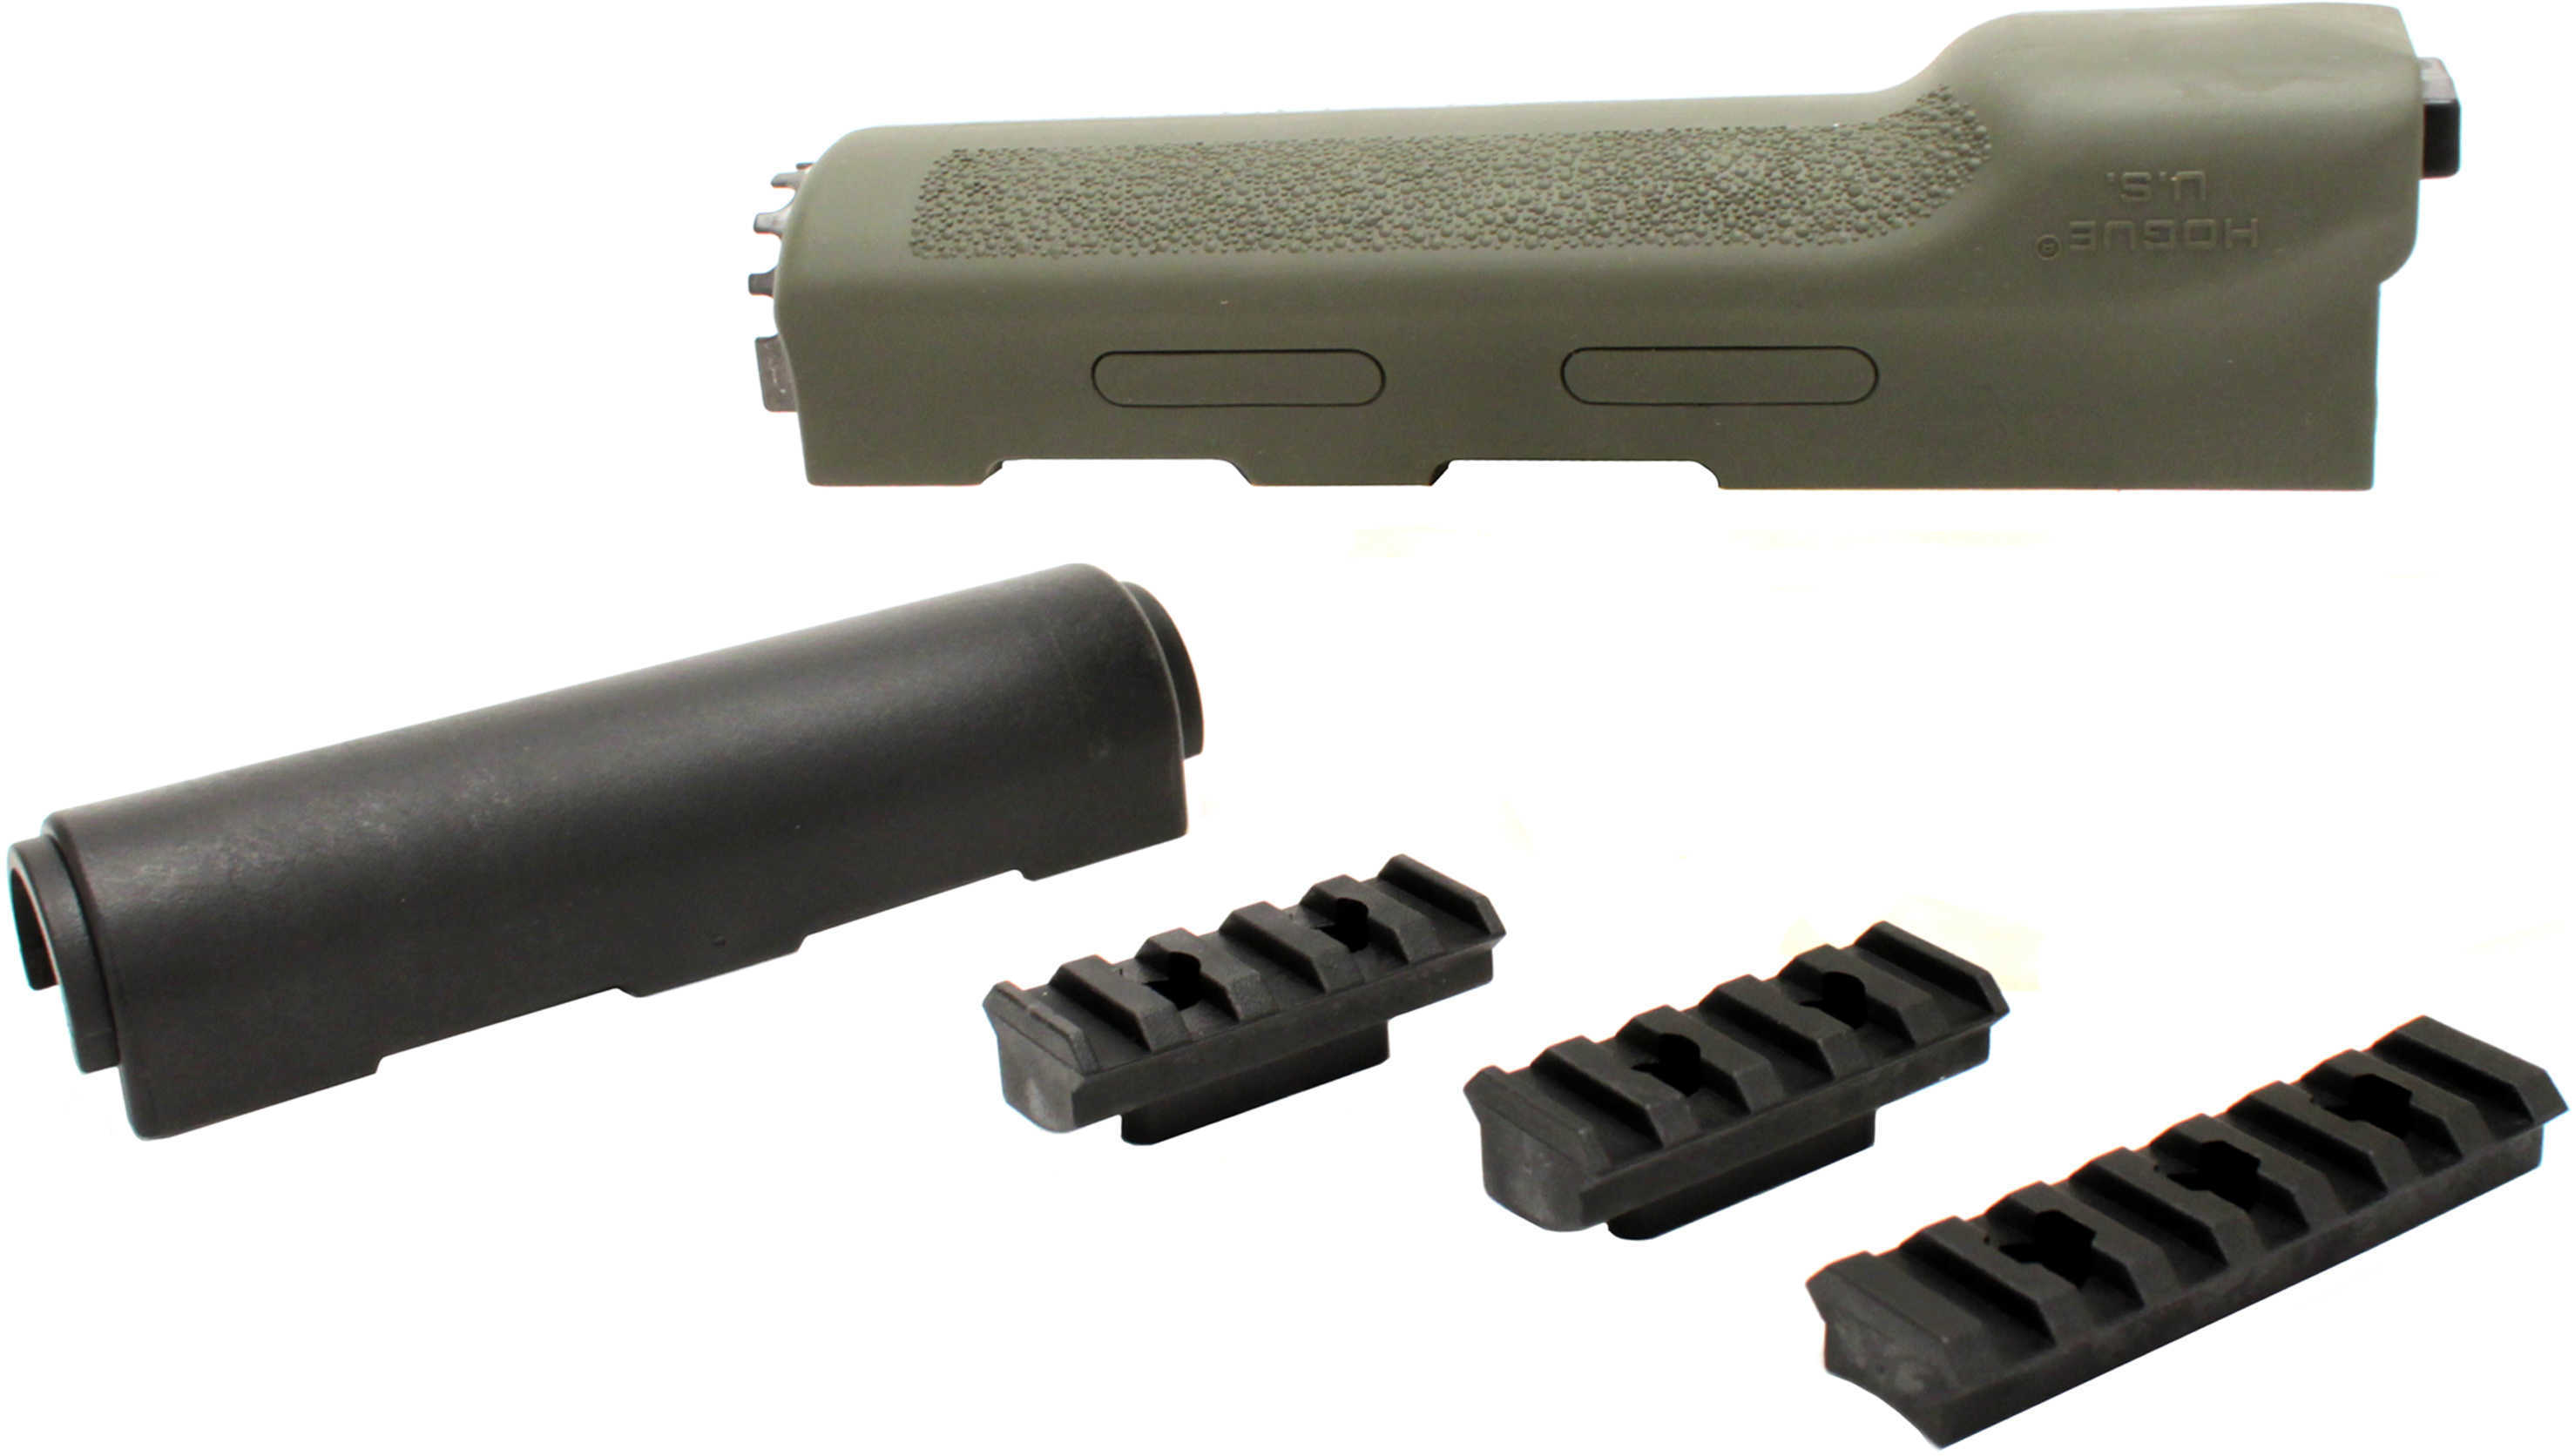 Hogue AK-47 Overmolded Forend Yugo Style, Rubber Grip Area, Olive Drab 74214